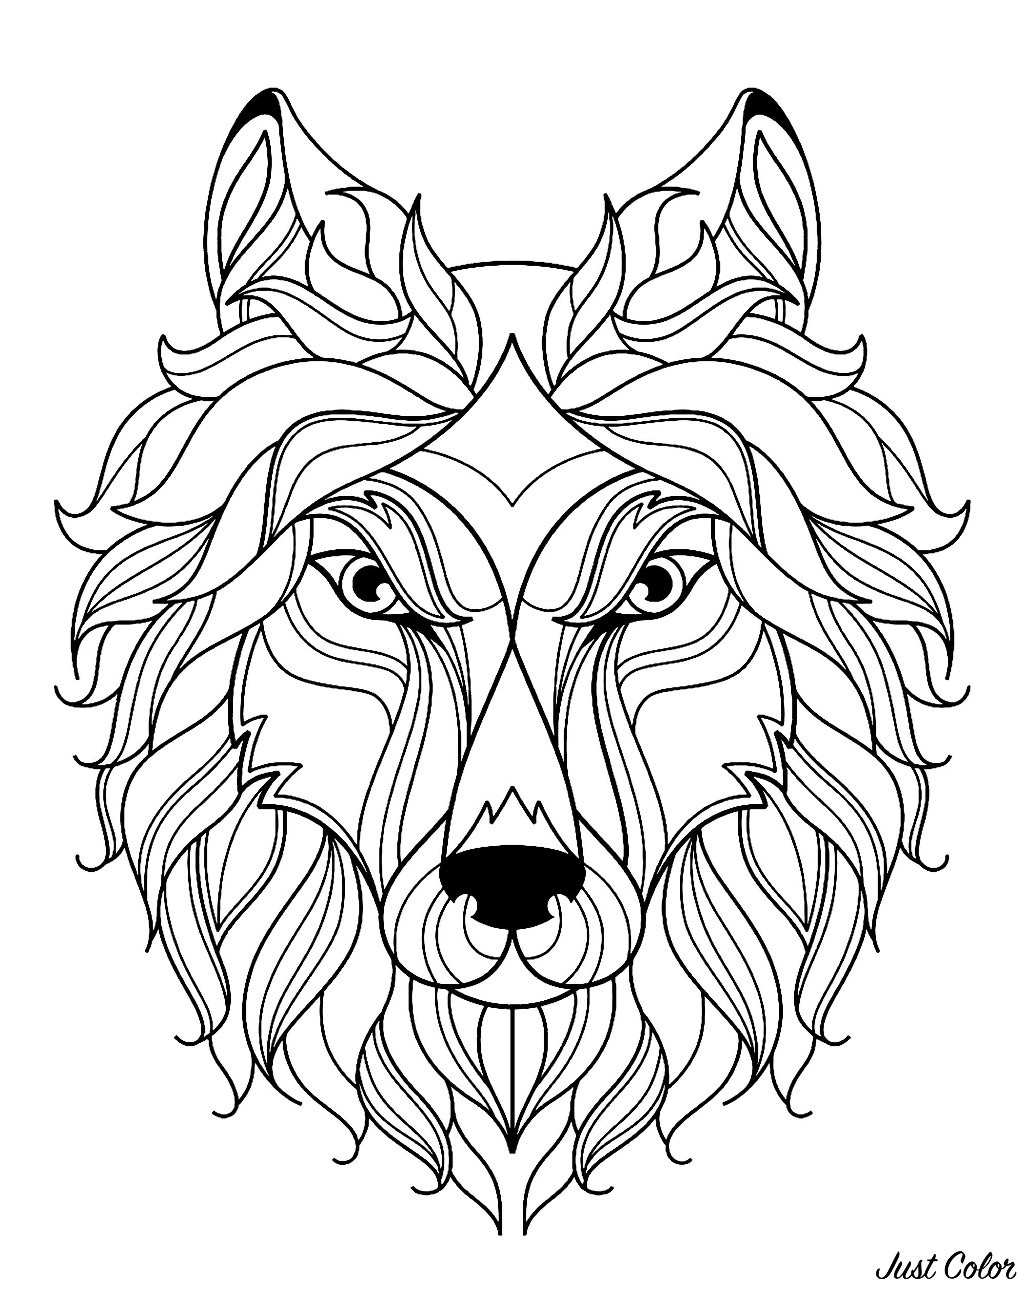 Adult Coloring Pages Wolf
 Big wolf head simple Wolves Adult Coloring Pages